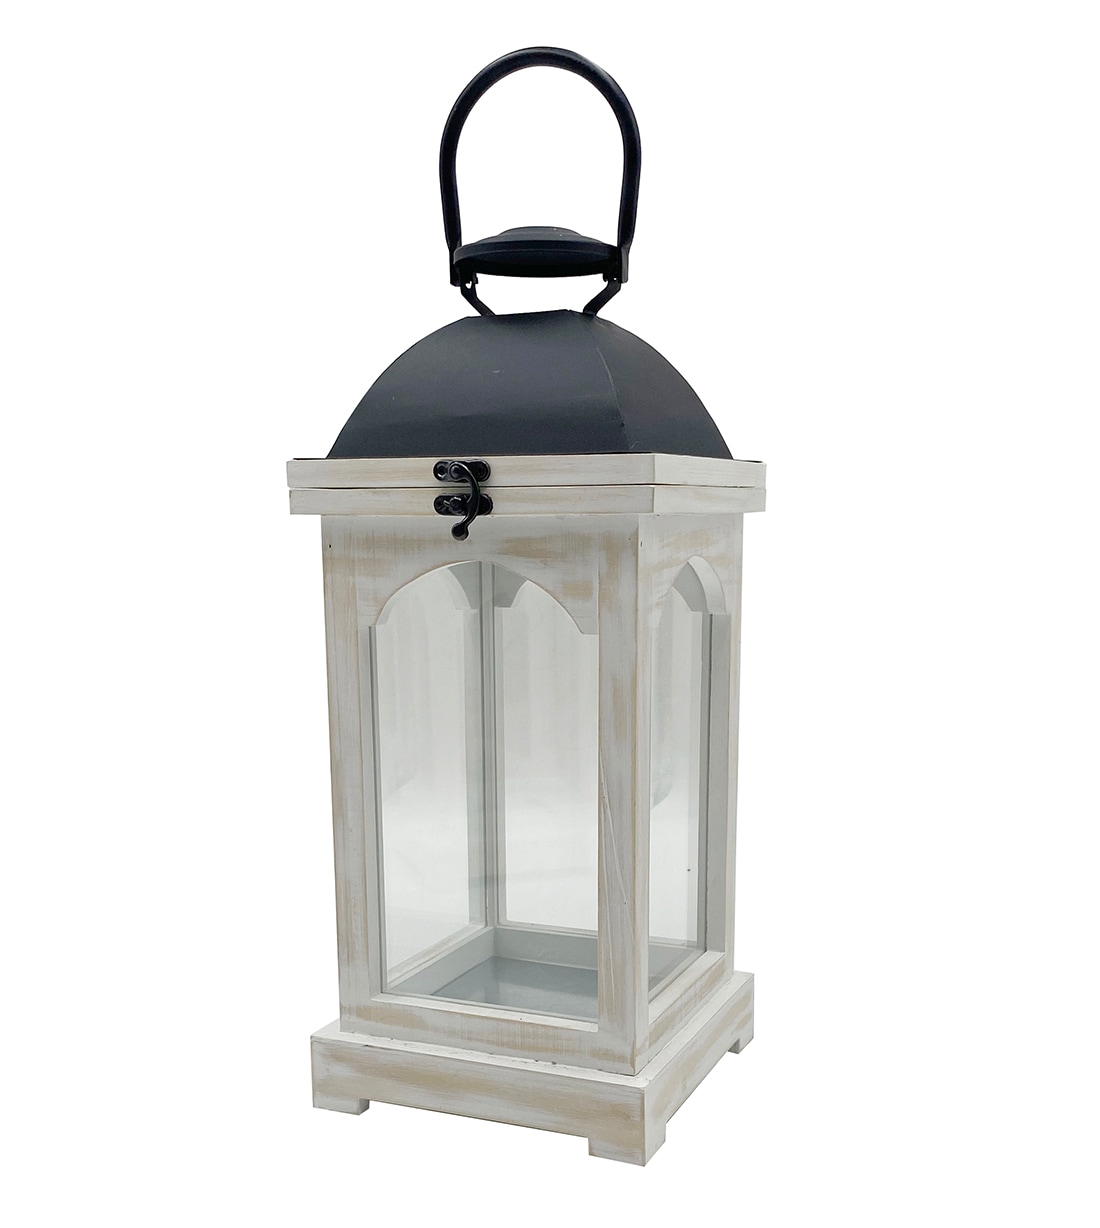 Gifts & Decor White Railroad Metal Cute Decorative Candle Lantern for sale online 